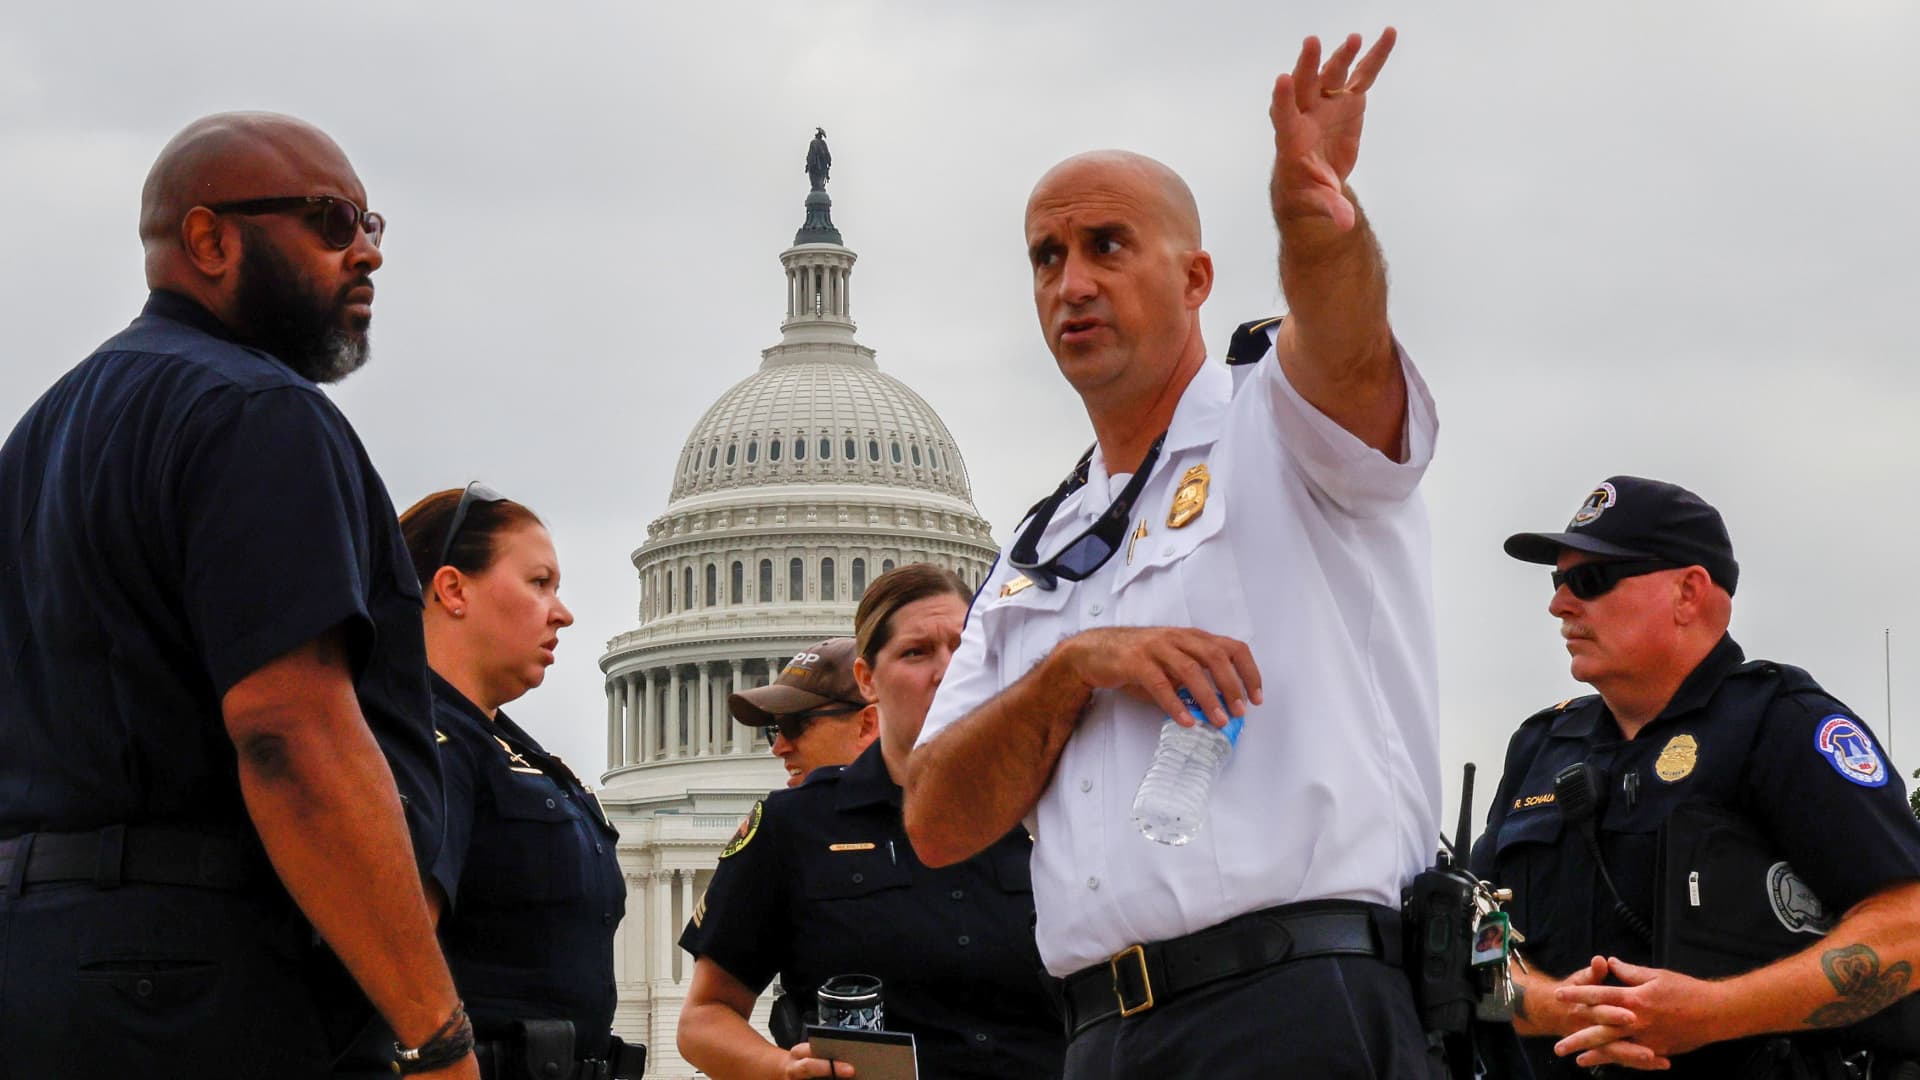 U.S. Capitol Police officials survey the area around the Capitol reflecting pool ahead of an expected rally Saturday in support of the Jan. 6 defendants in Washington, U.S. September 16, 2021.